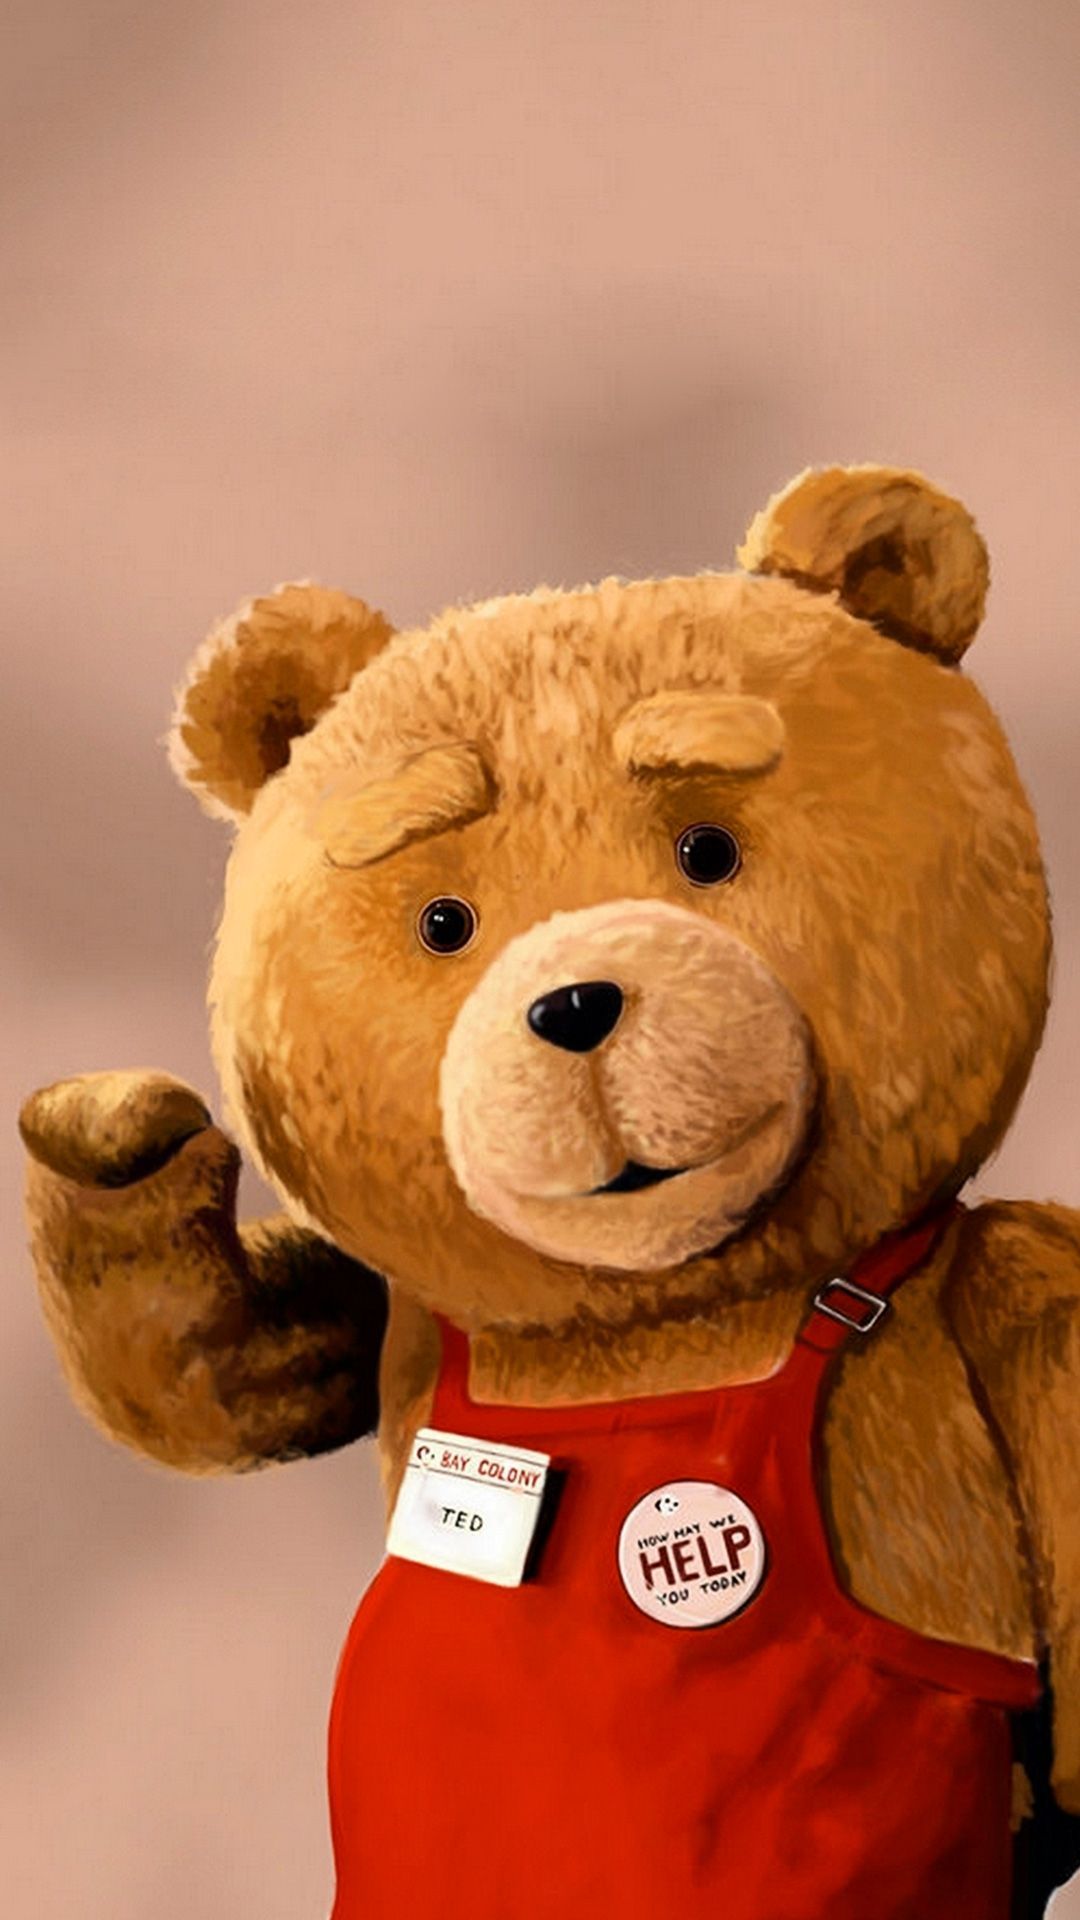 ↑↑TAP AND GET THE FREE APP! Art Creative Movie Cinema Ted 2 Is